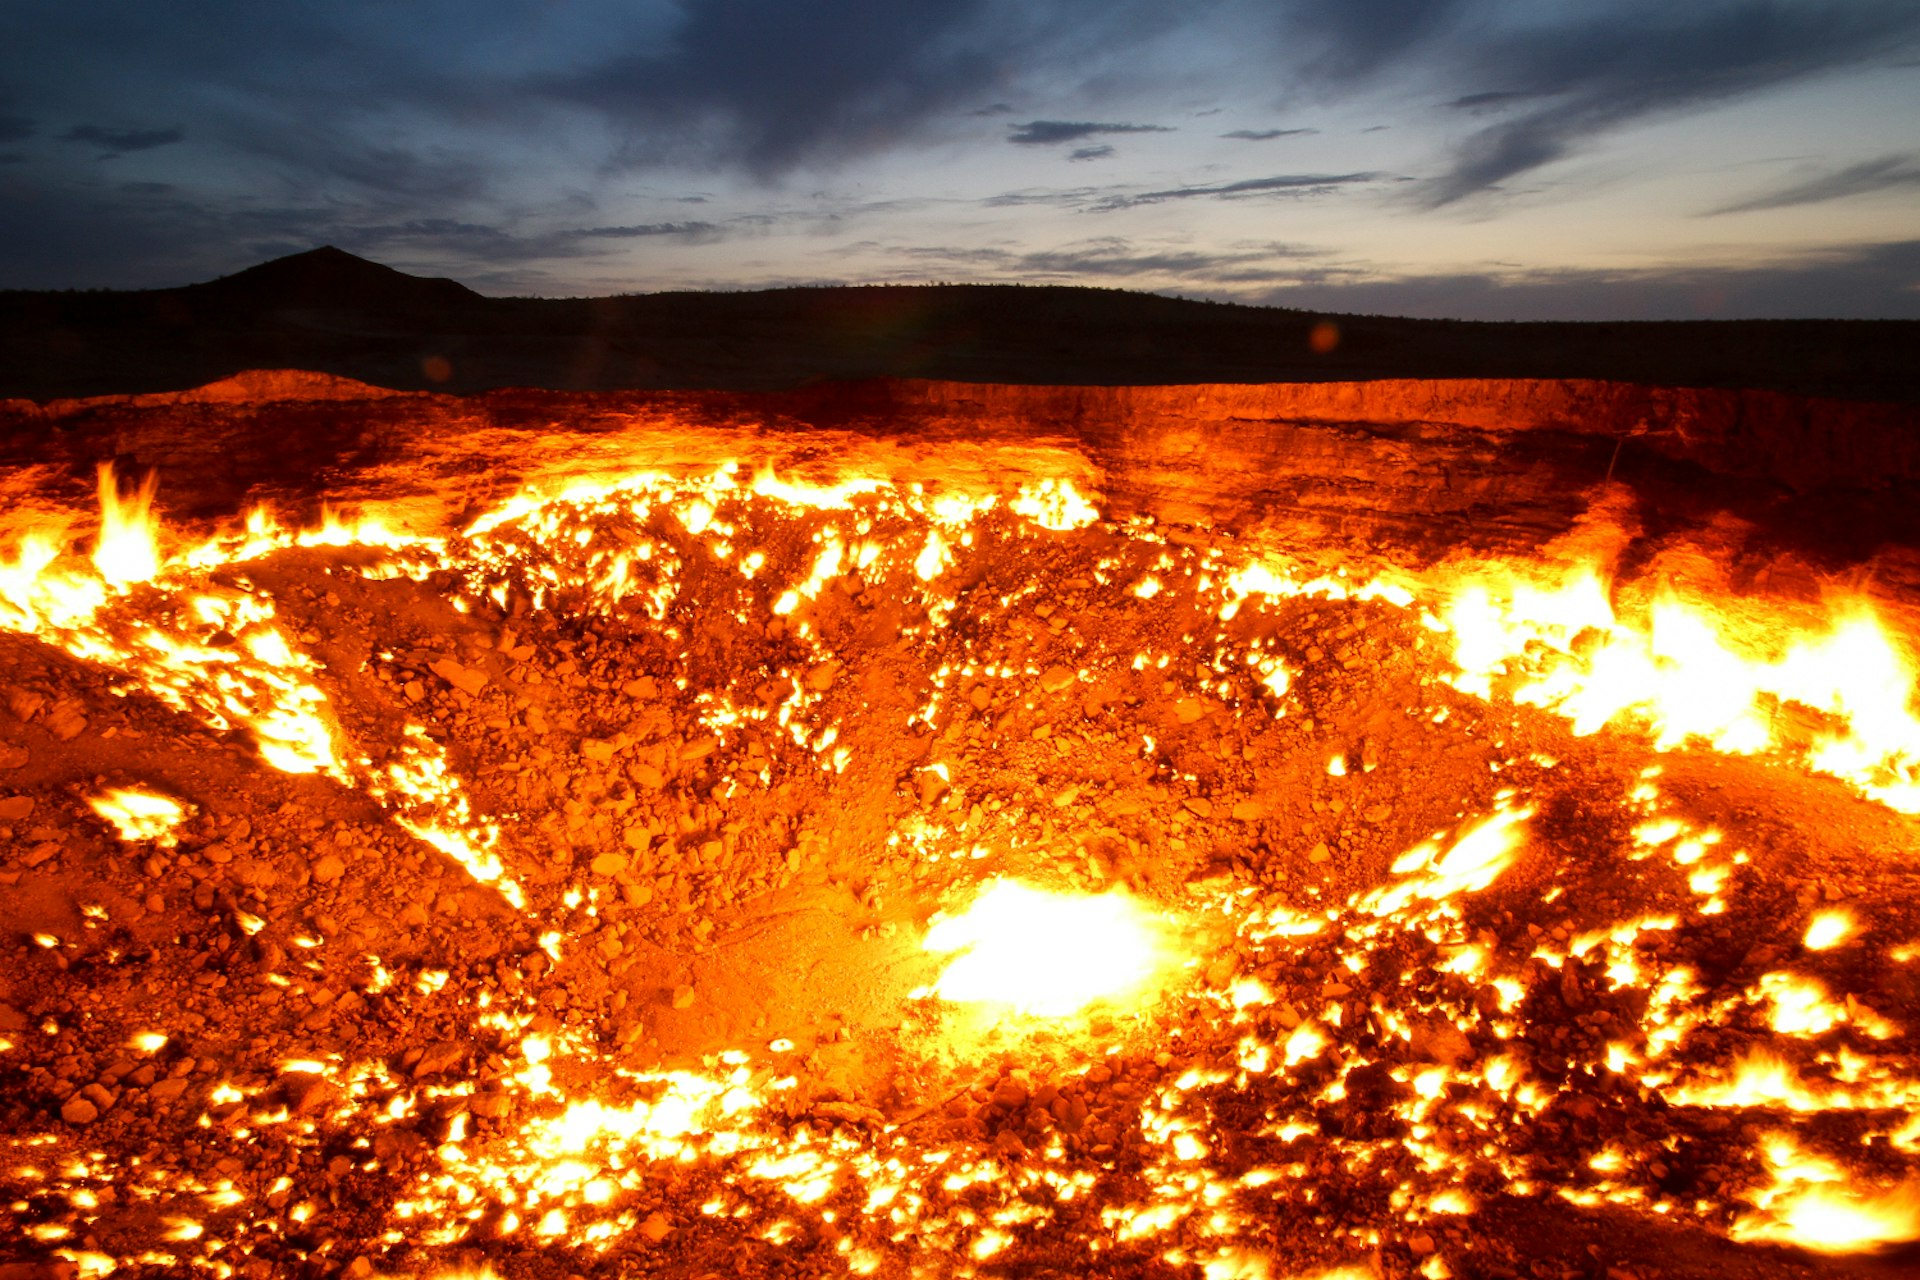 'Doorway to hell': Darvaza Gas Crater burning in remote Turkmenistan. Image by Stephen Lioy / Lonely Planet